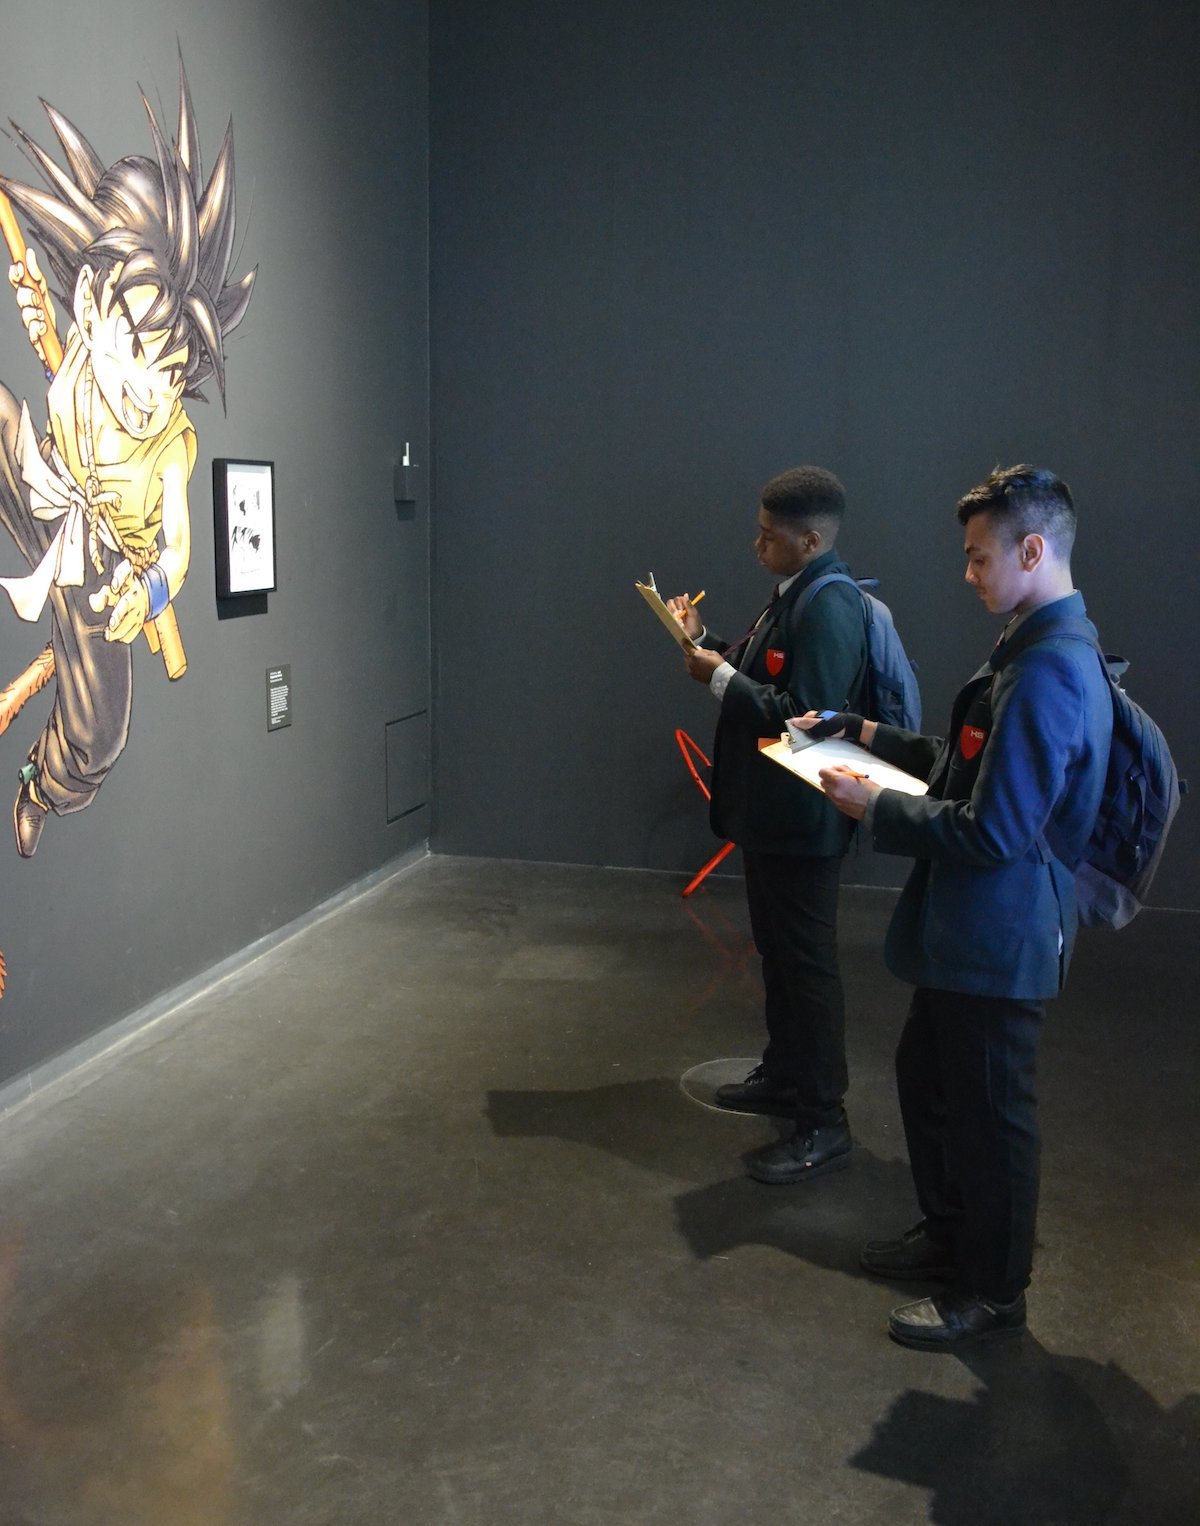 Students from haverstock school in camden visit the manga exhibition as part of their bronze arts award qualification